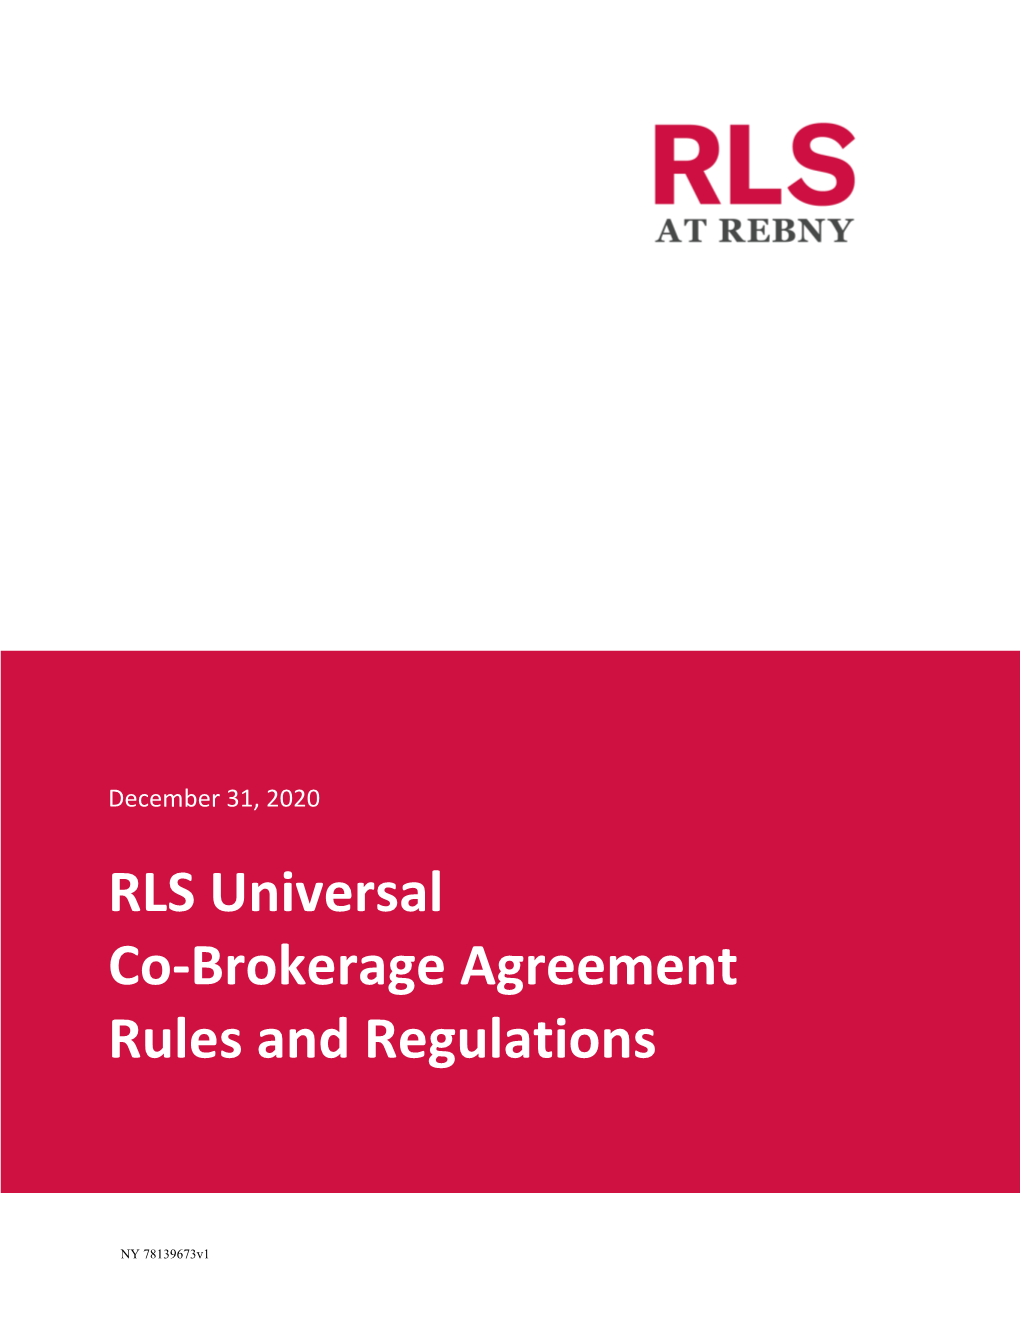 RLS Universal Co-Brokerage Agreement Rules and Regulations